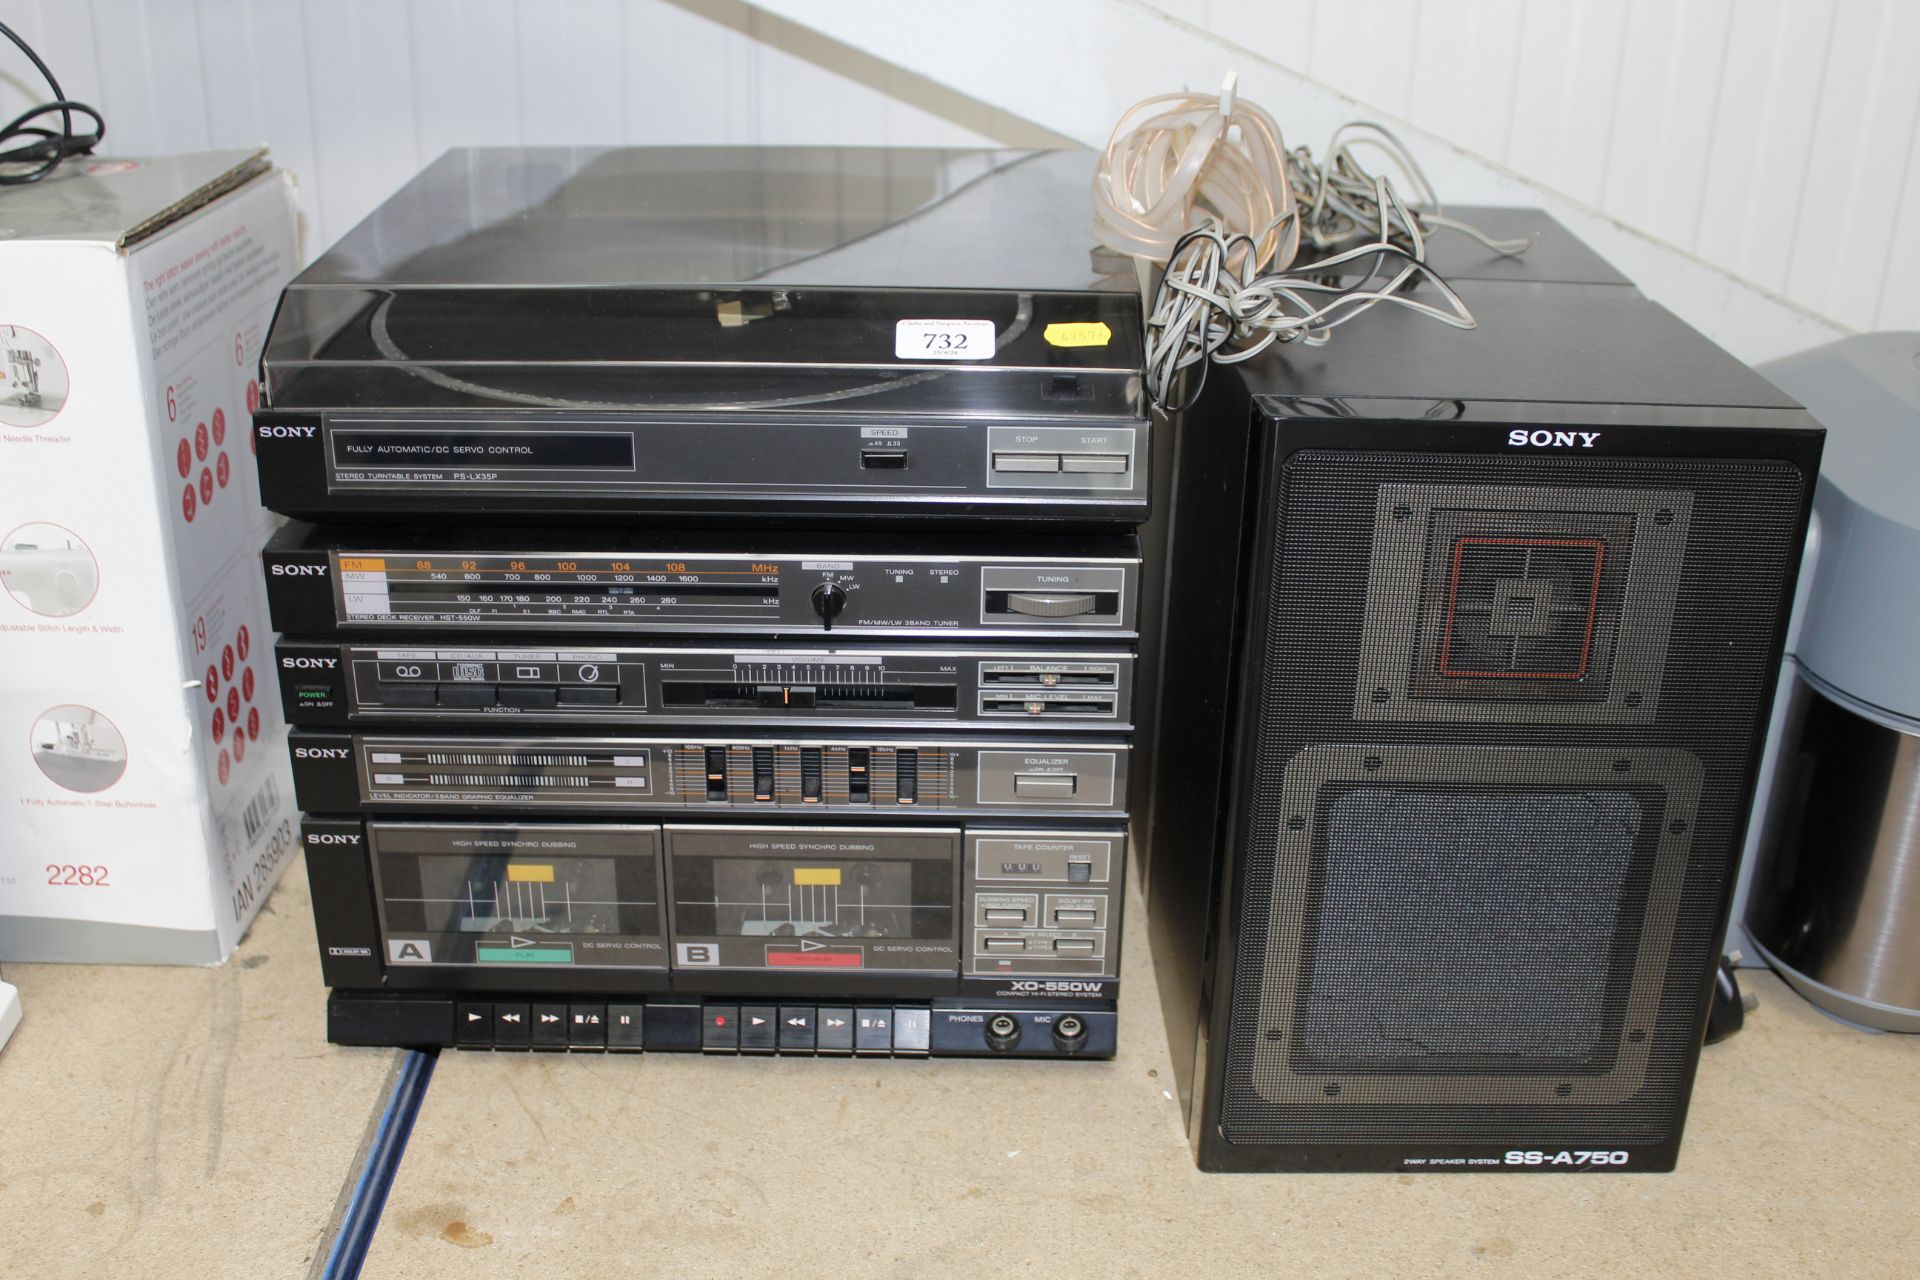 A Sony HiFi together with a pair of speakers